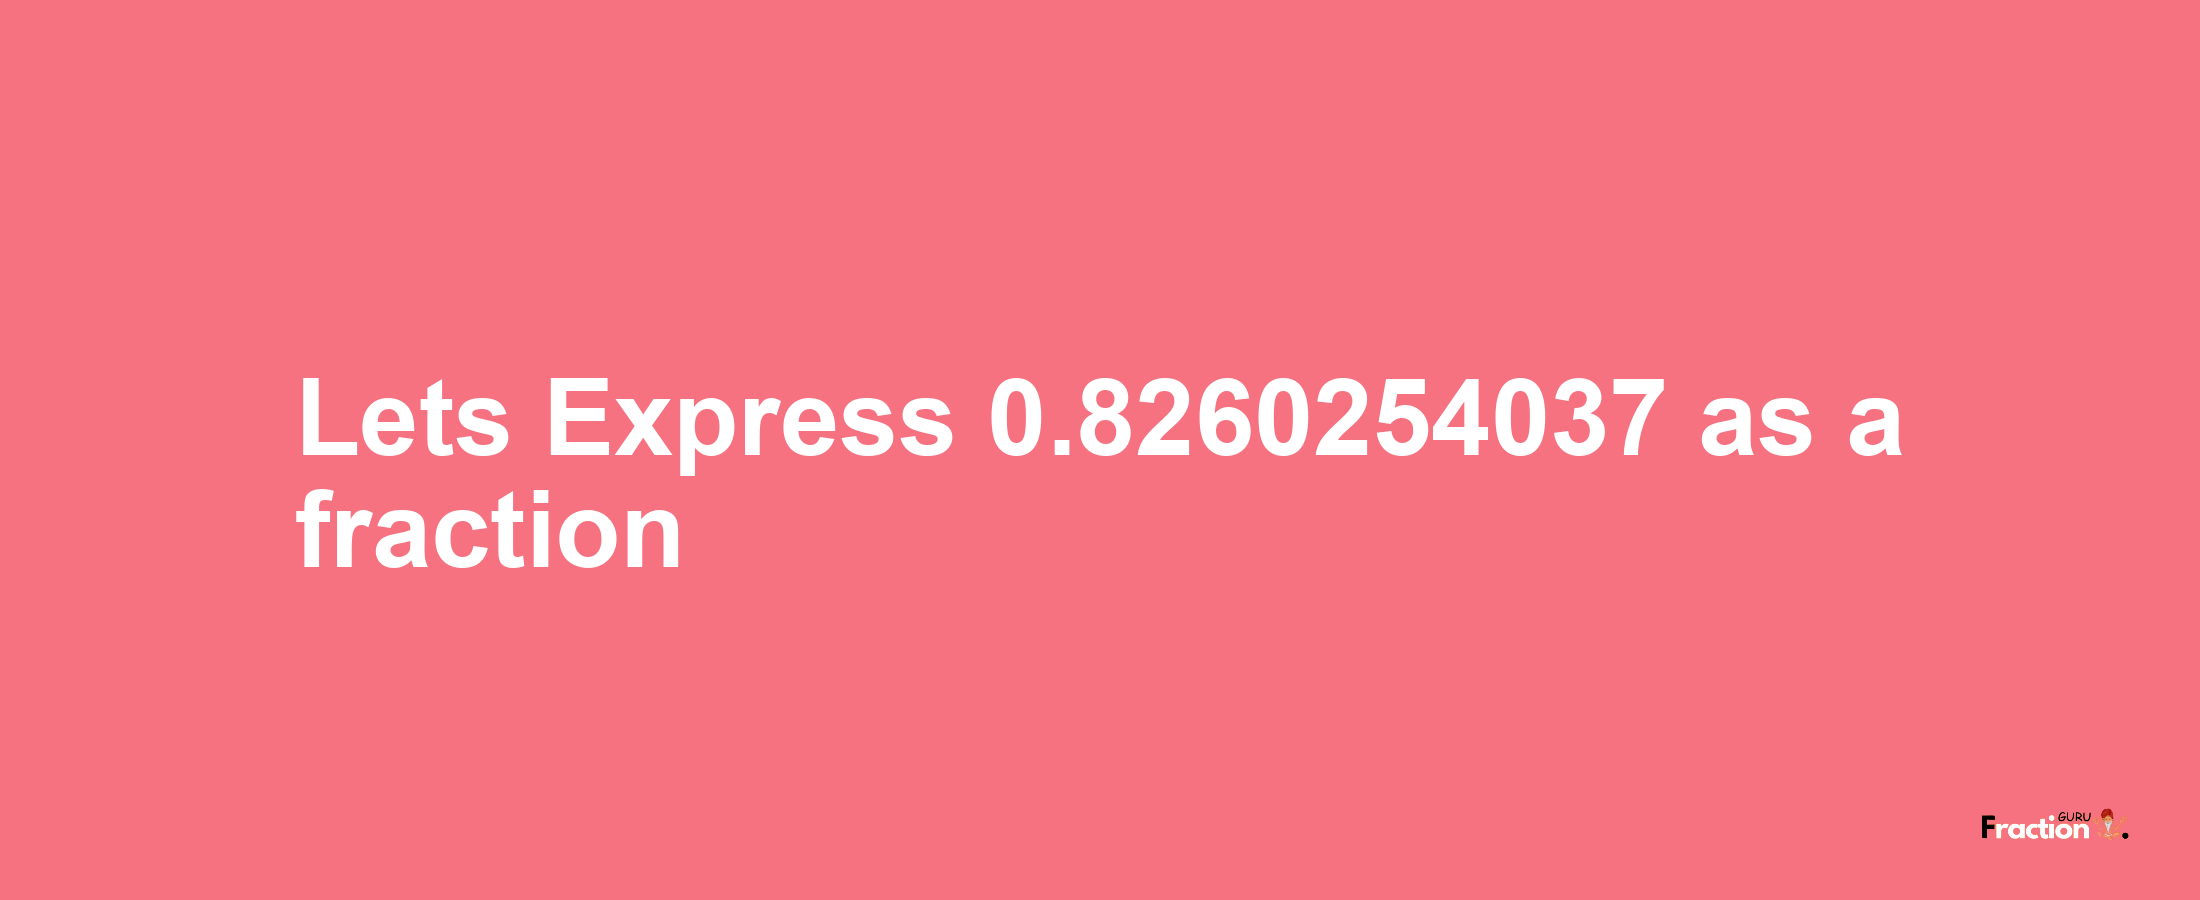 Lets Express 0.8260254037 as afraction